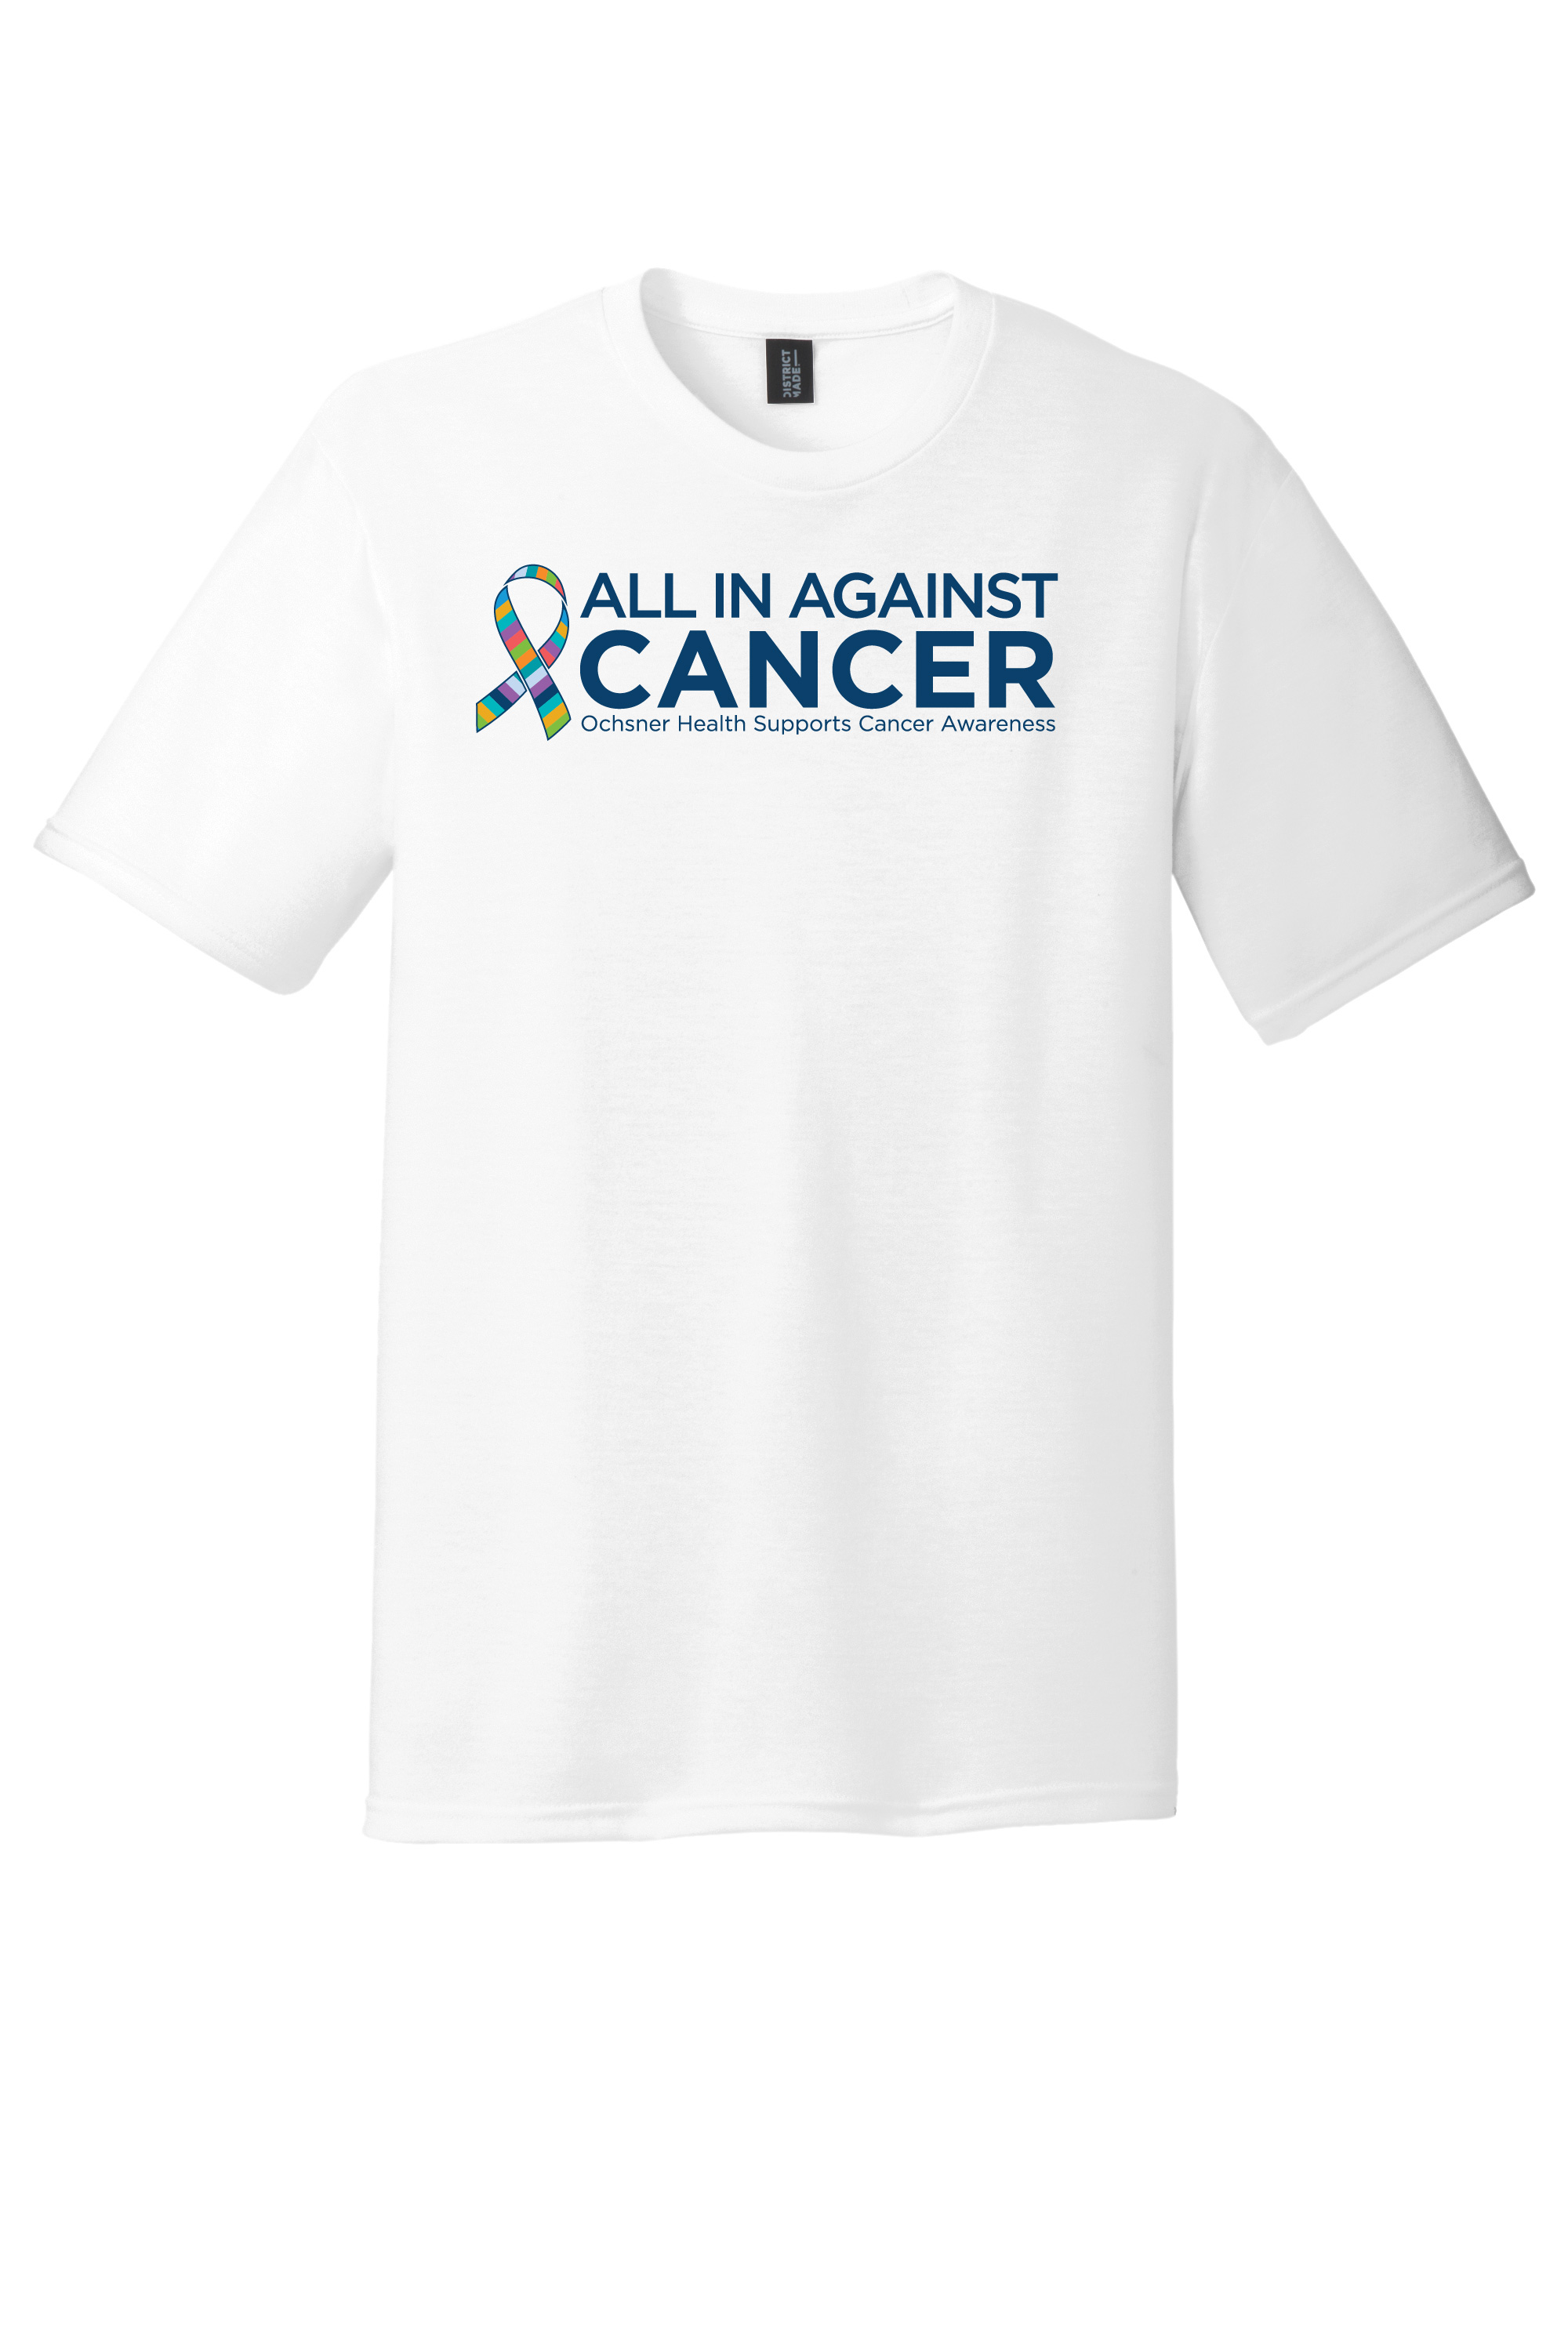 All in Against Cancer Unisex T-Shirt, , large image number 2